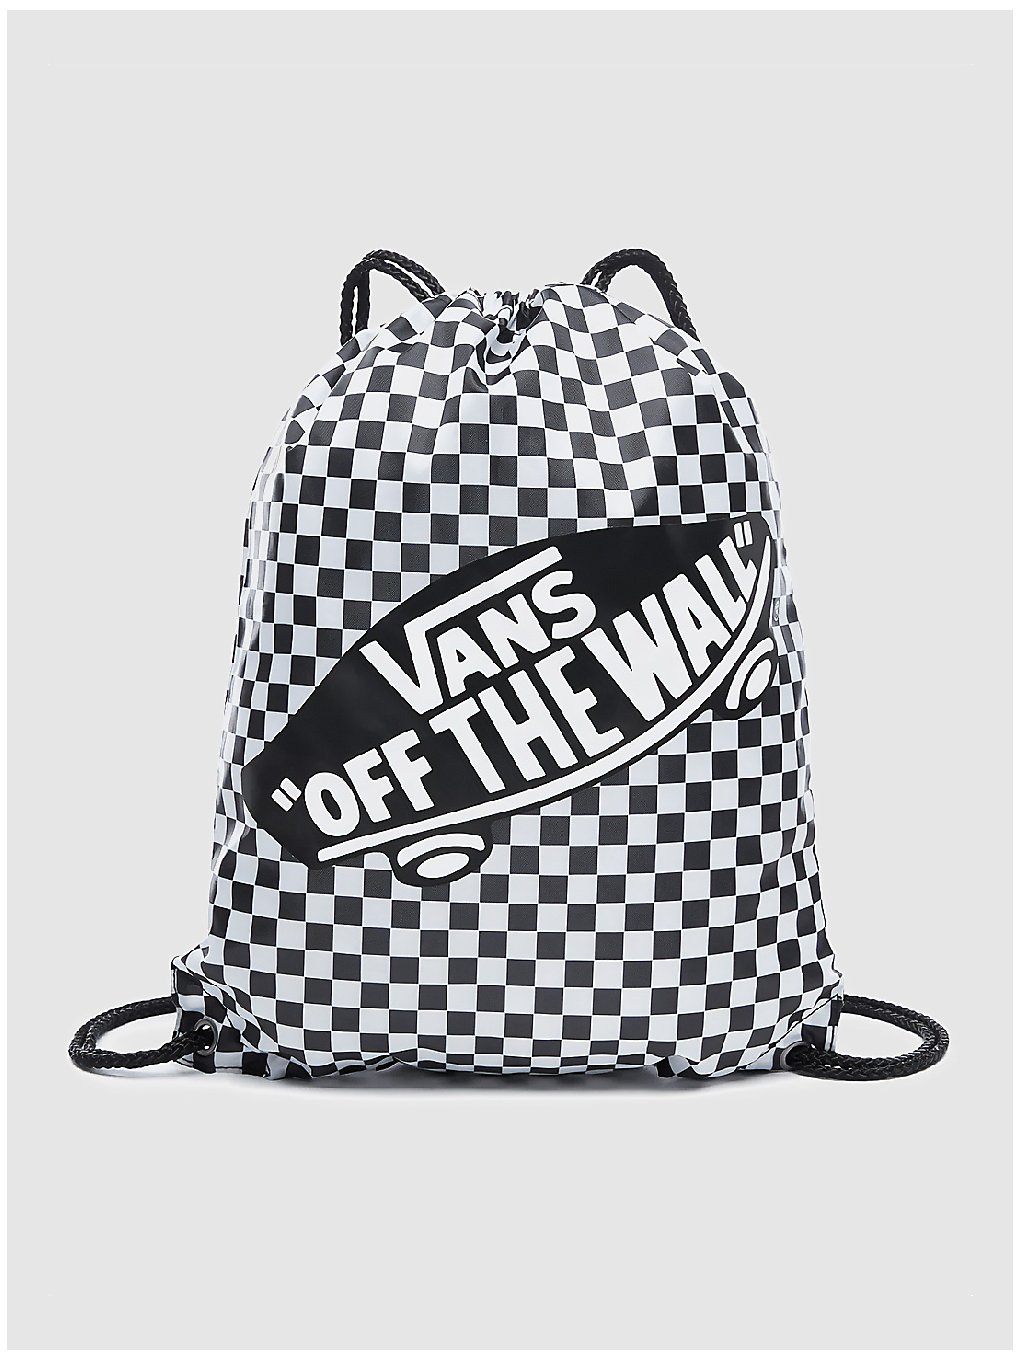 Vans Checkerboard Benched Backpack white checkerboard kaufen